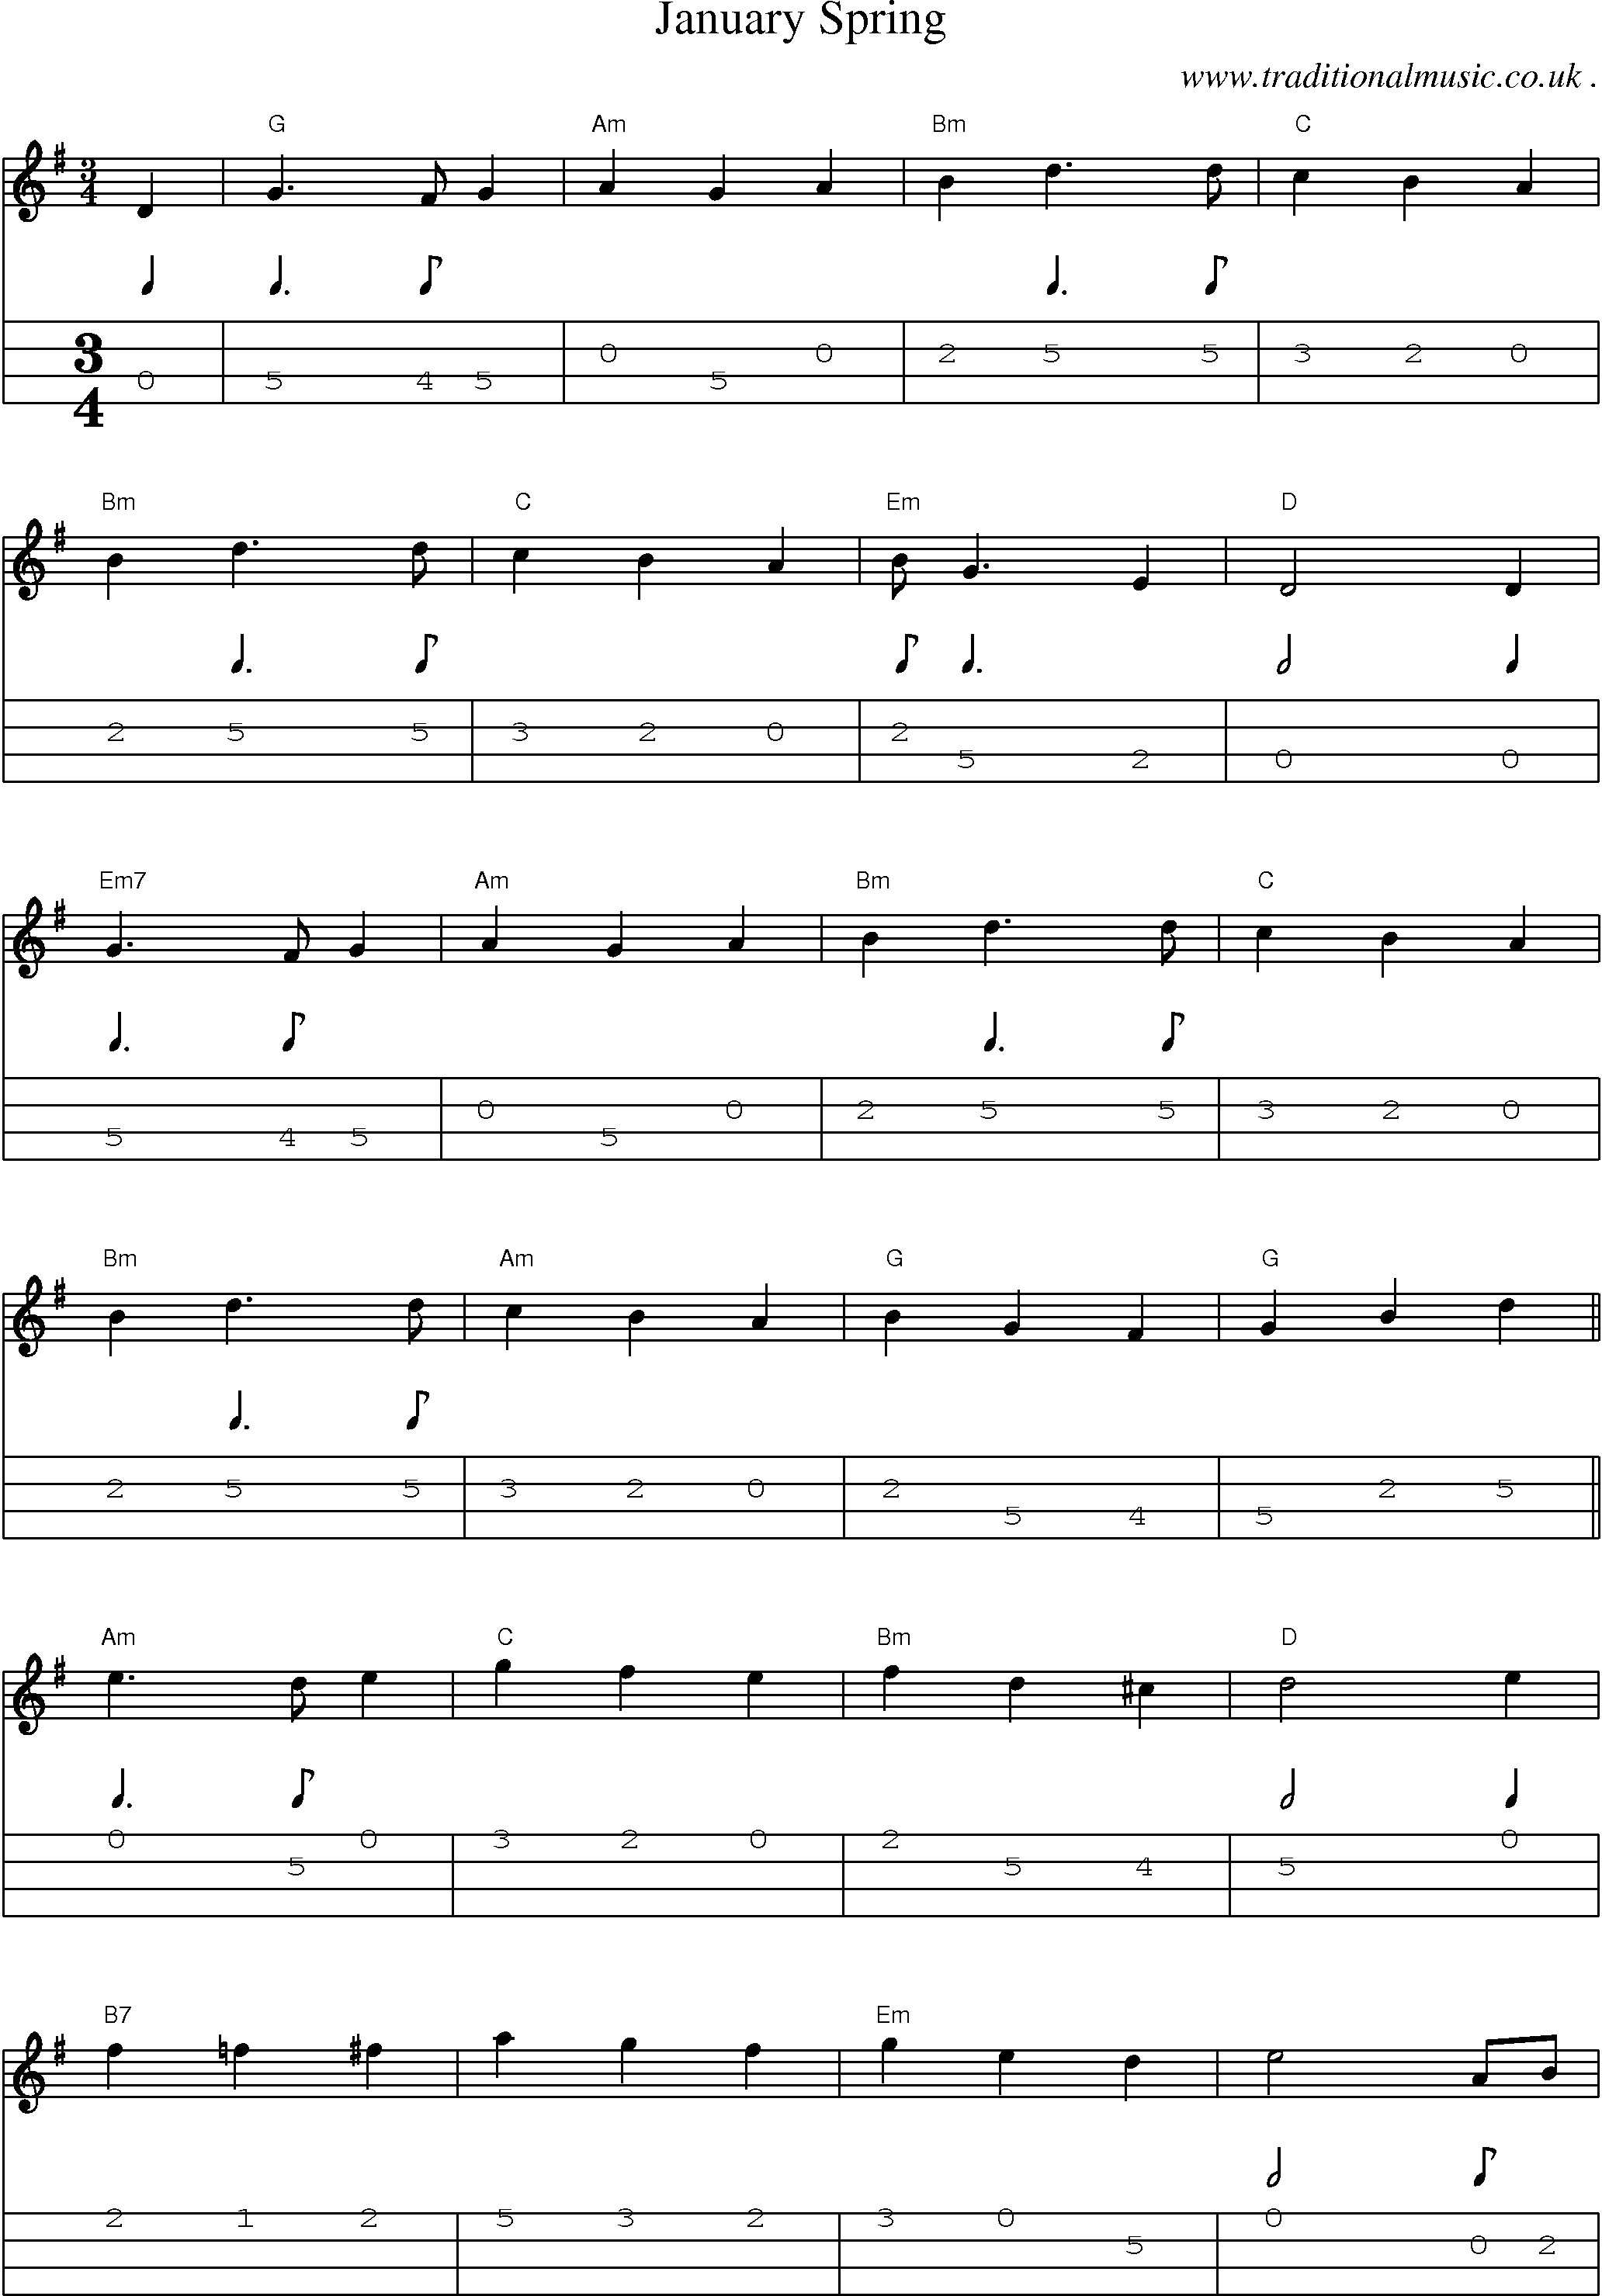 Music Score and Guitar Tabs for January Spring